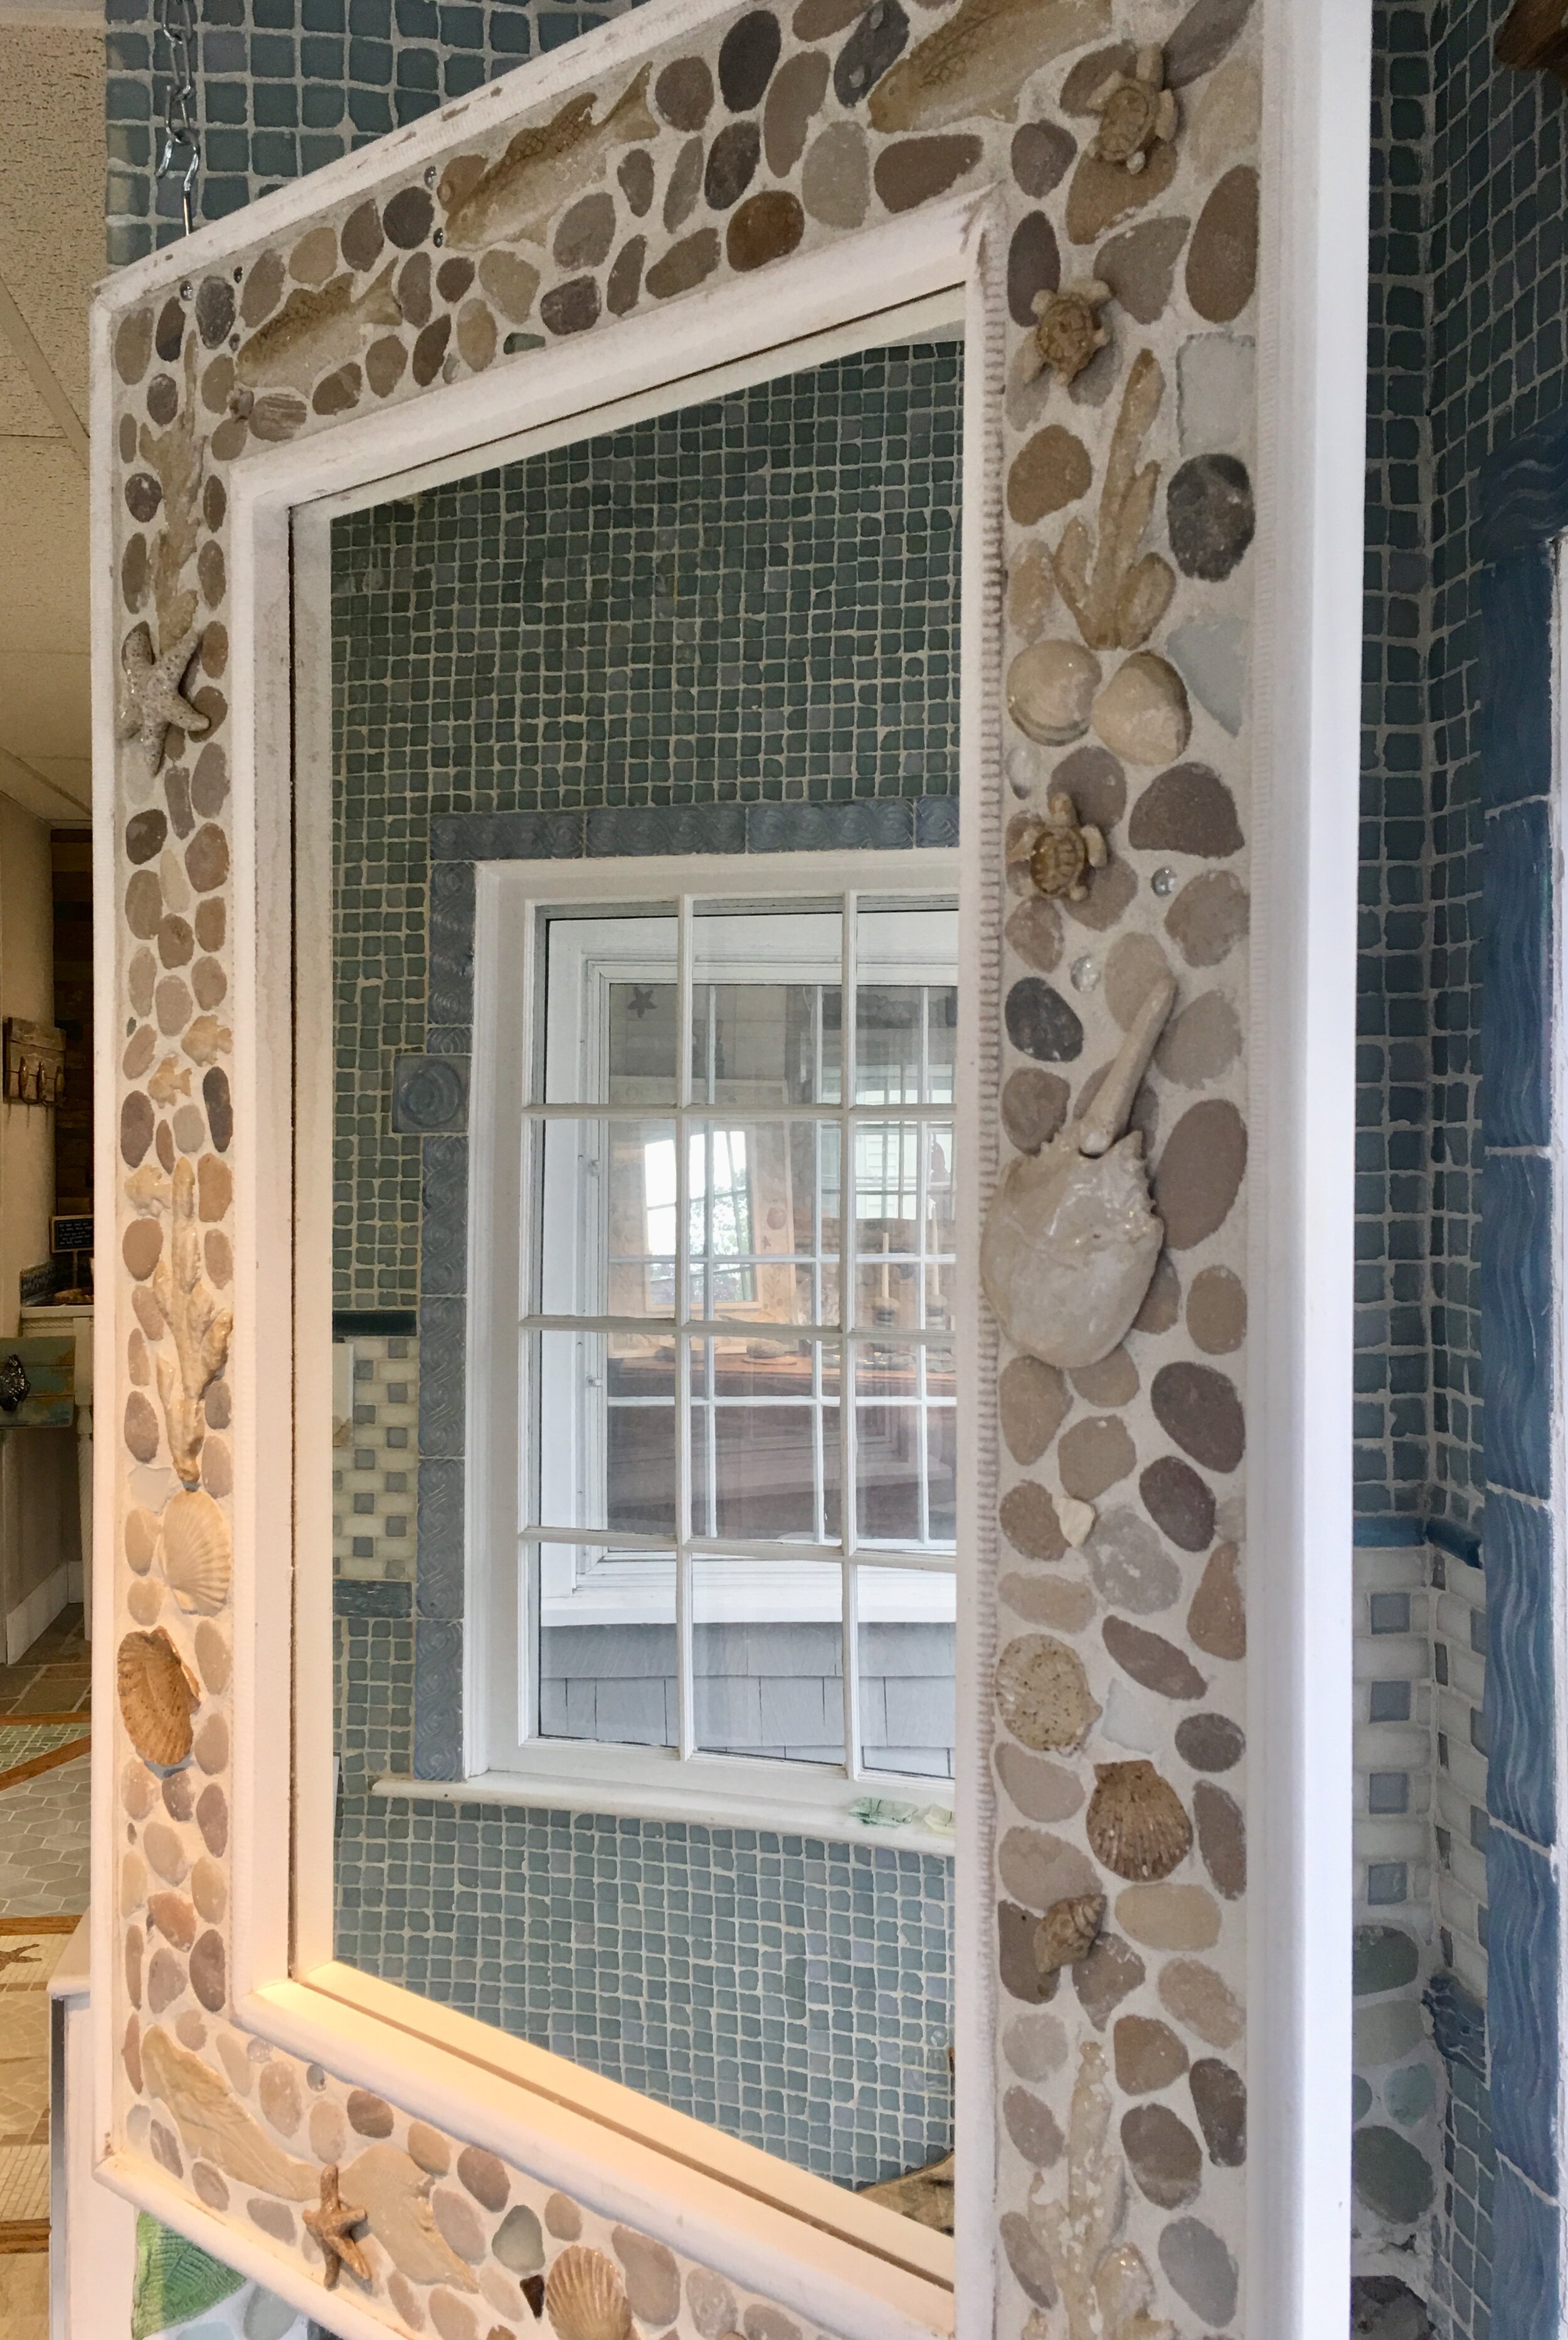   Cape Cod Tile Works Custom tiles  In Harwich Ma Ask for Lane Meehan and tell Schoolhouse Construction 